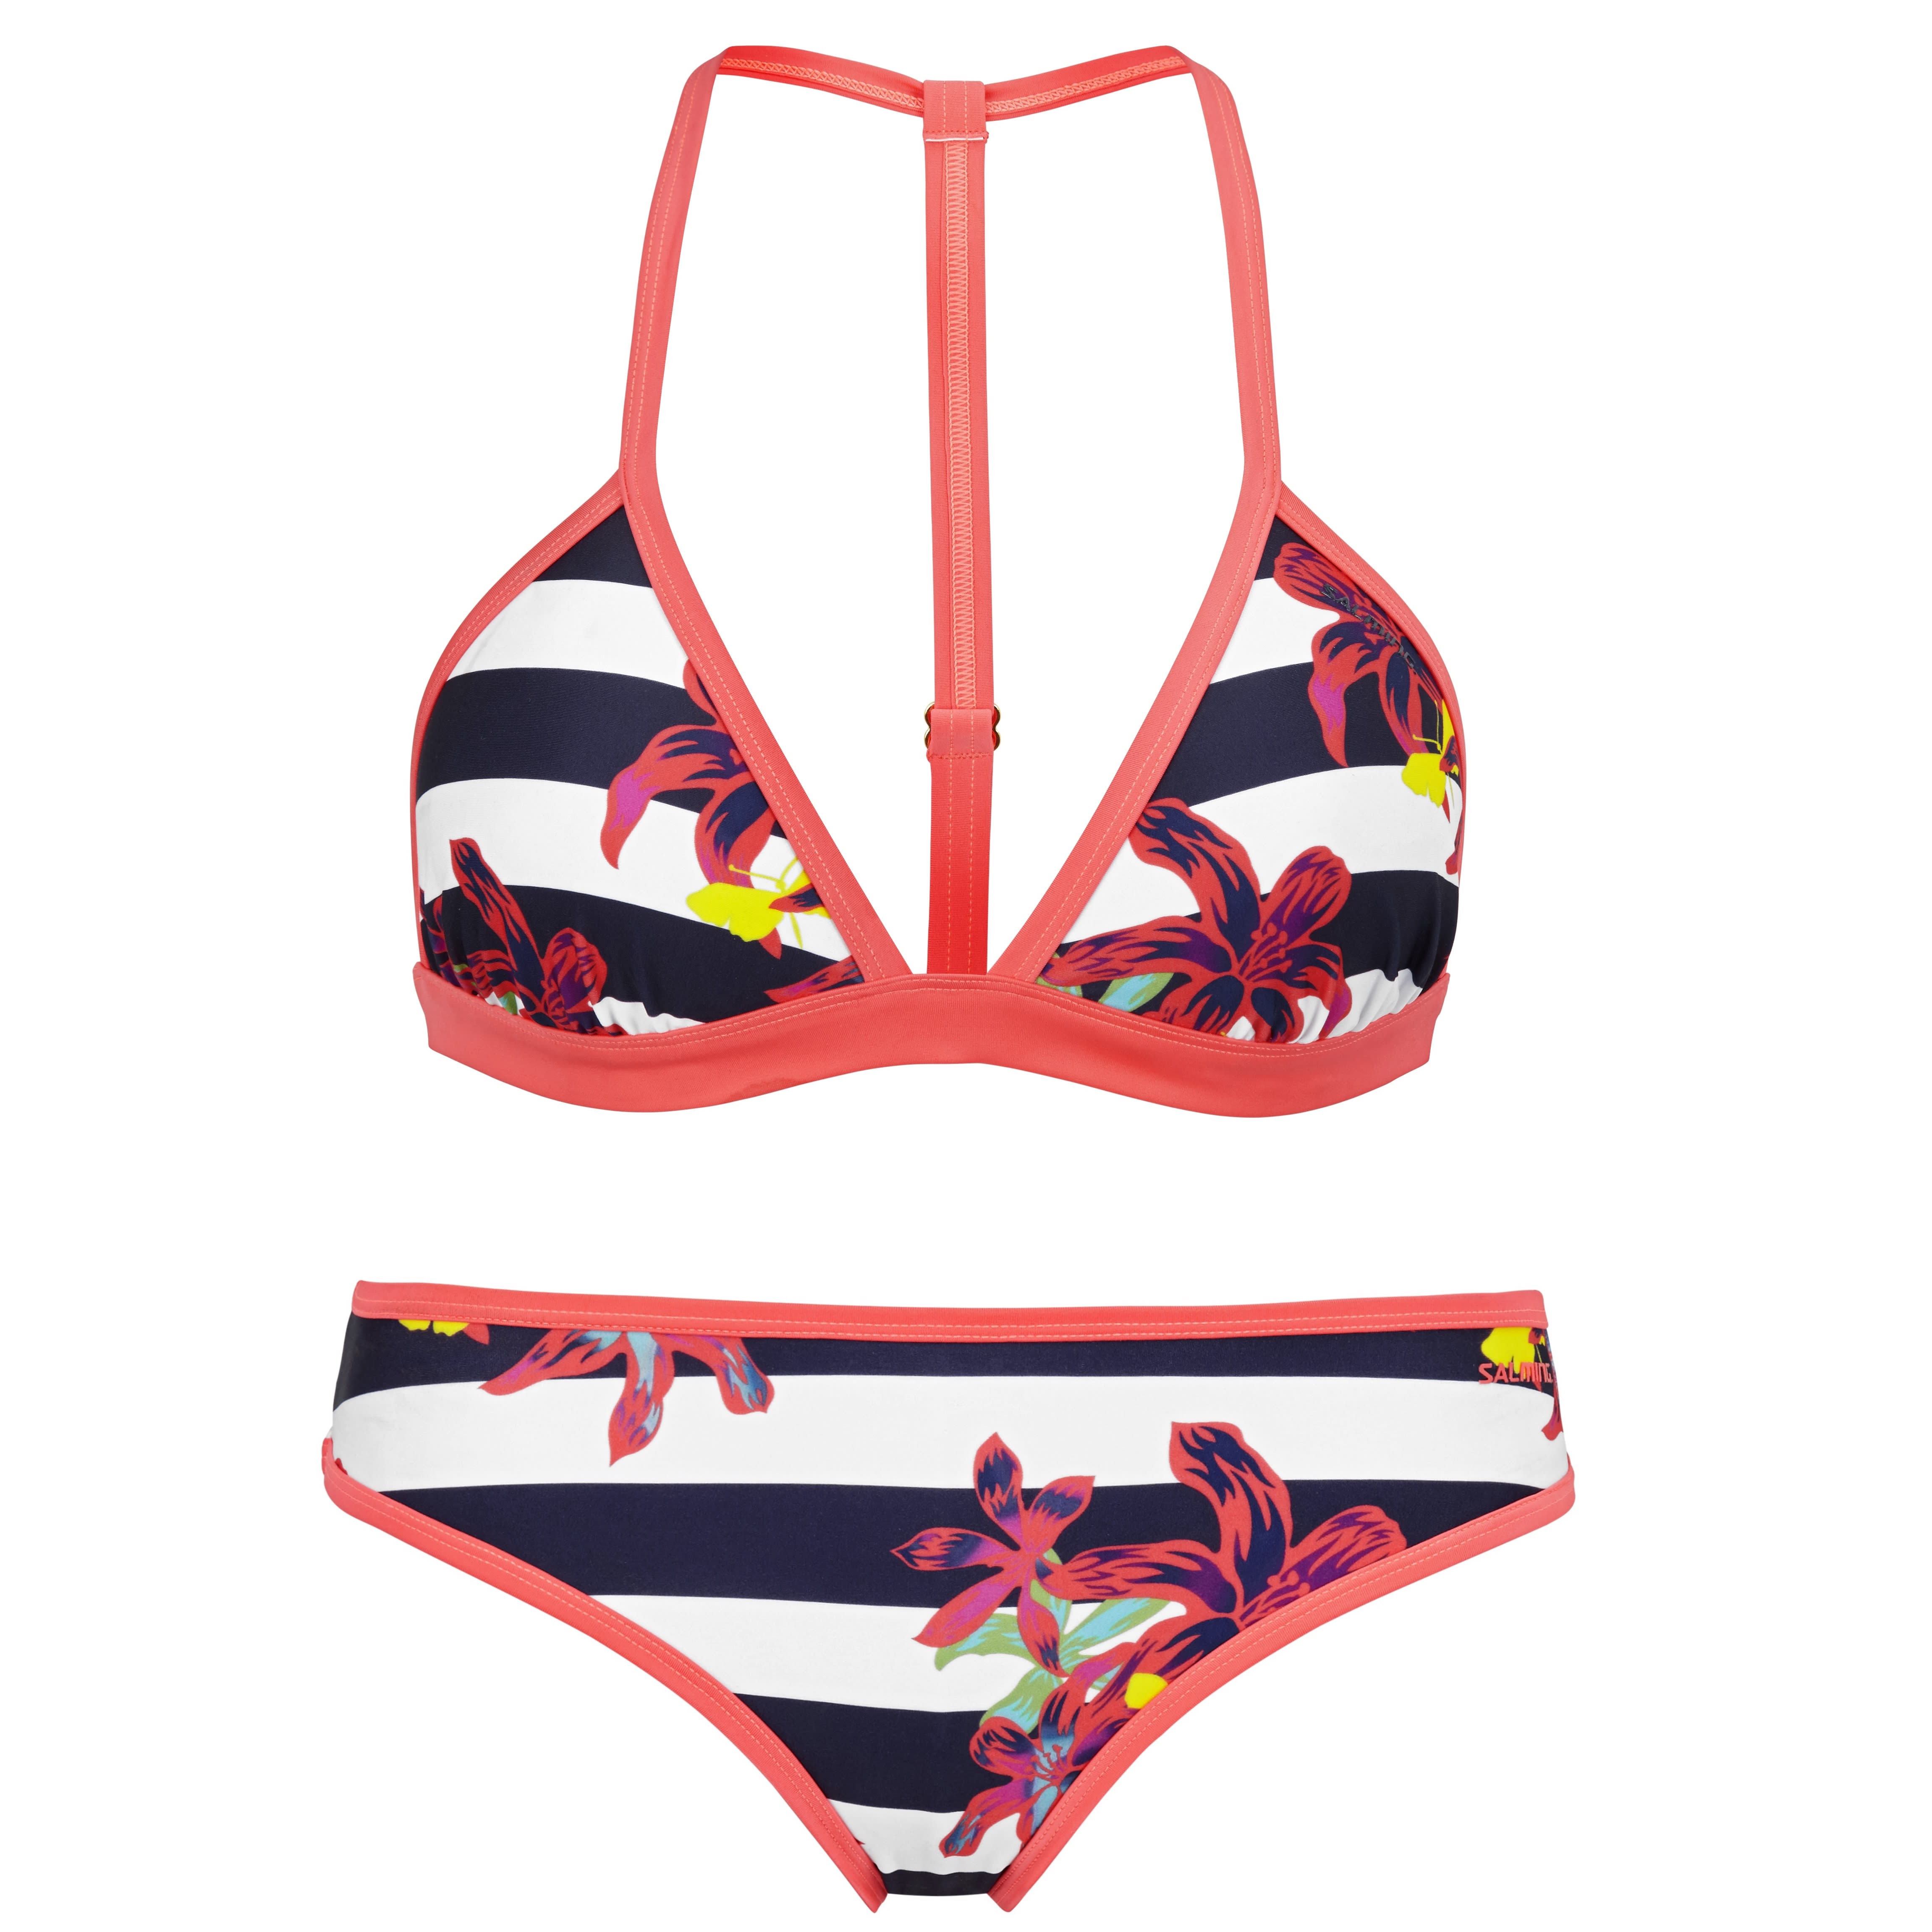 Team up with Or either marathon Buy Salming Tropical Bikini Set from Outnorth